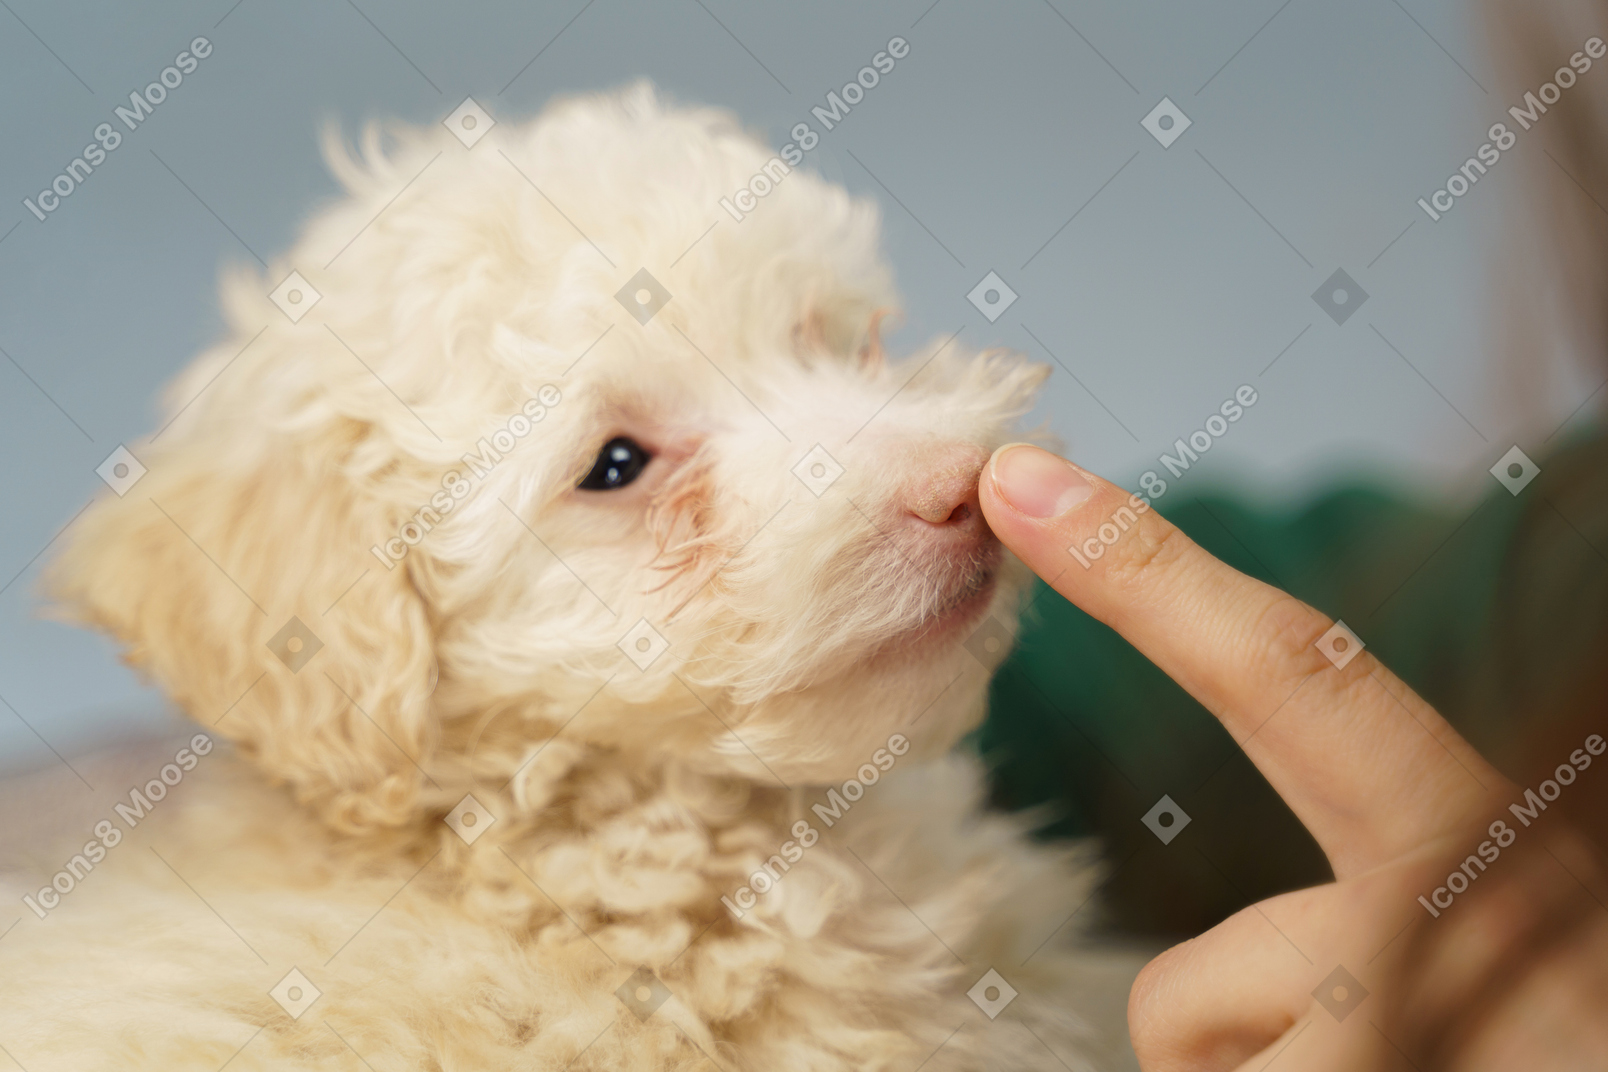 Close-up of a human hand pointing poodle's nose